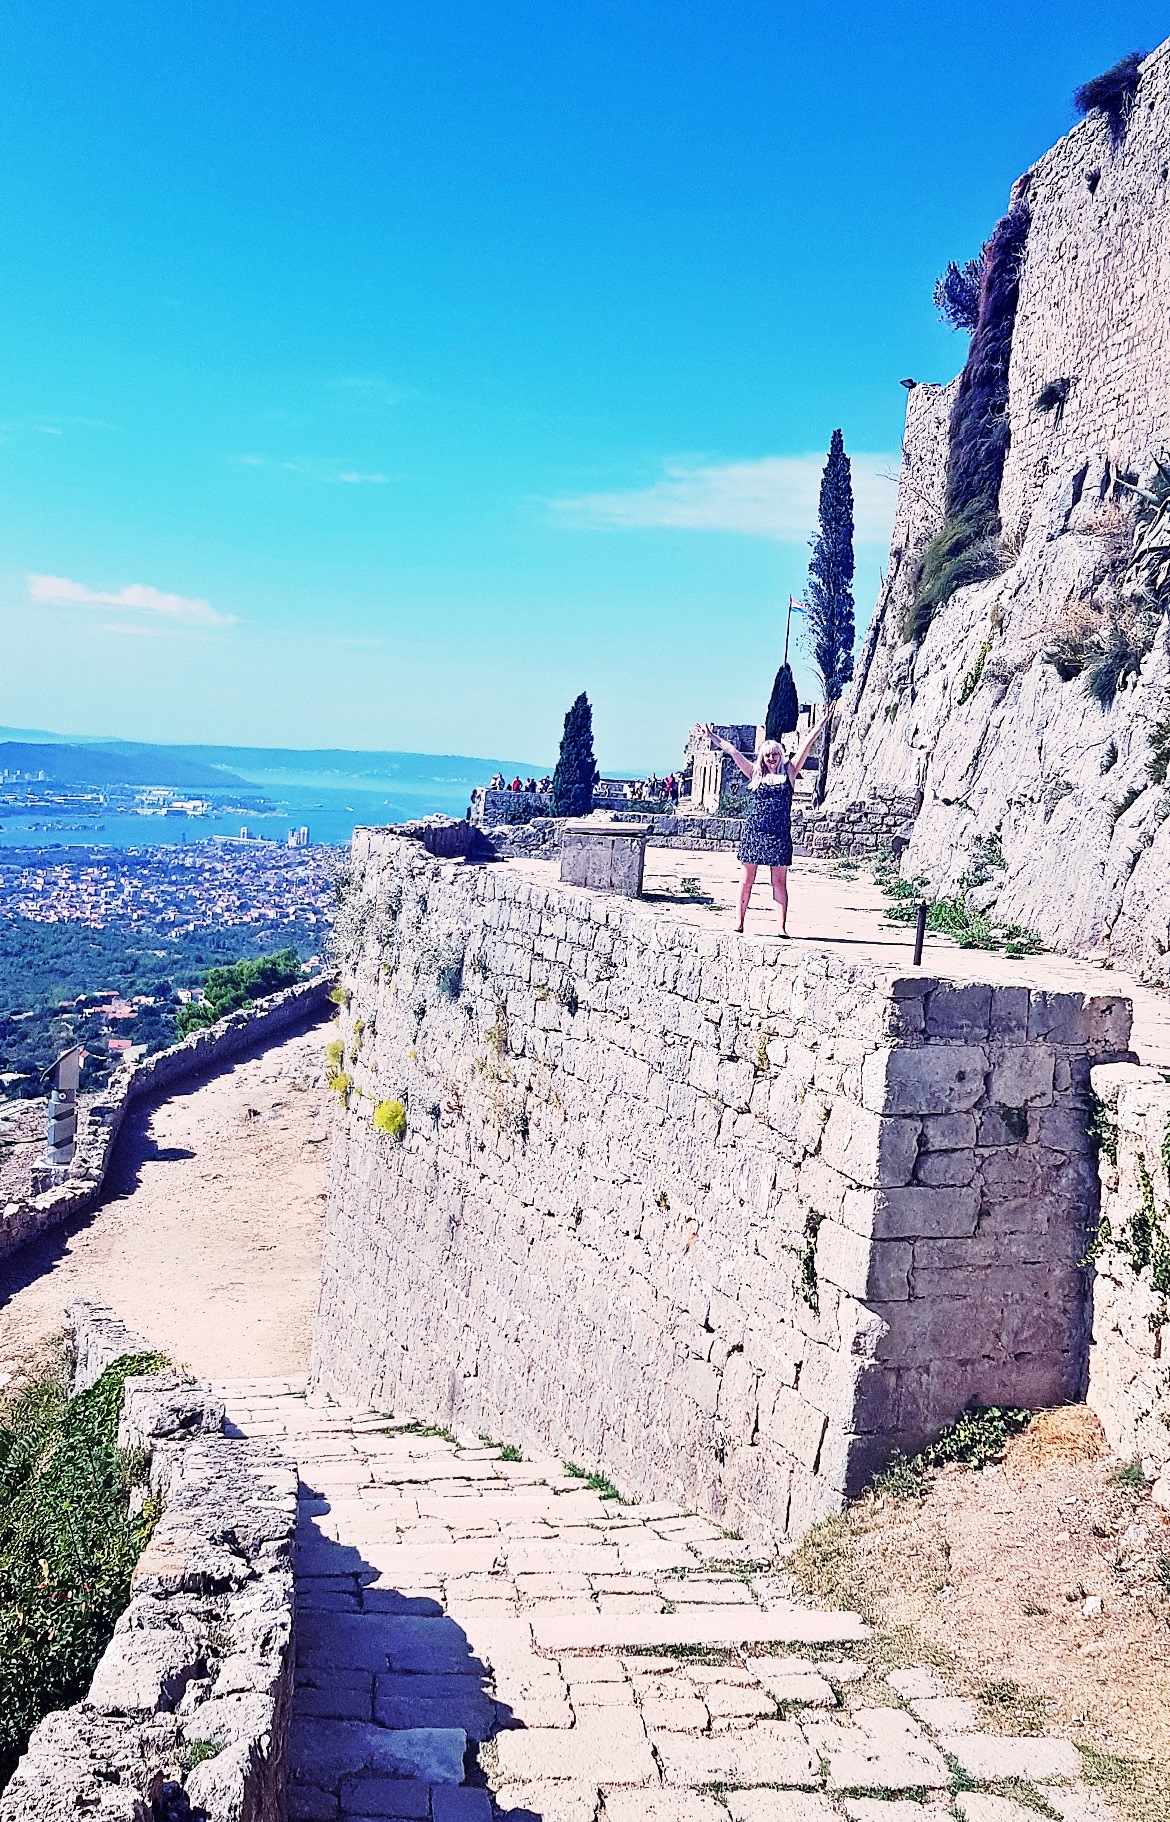 Game of Thrones filming location at Klis Fortress - Croatia in Photographs by BeckyBecky Blogs